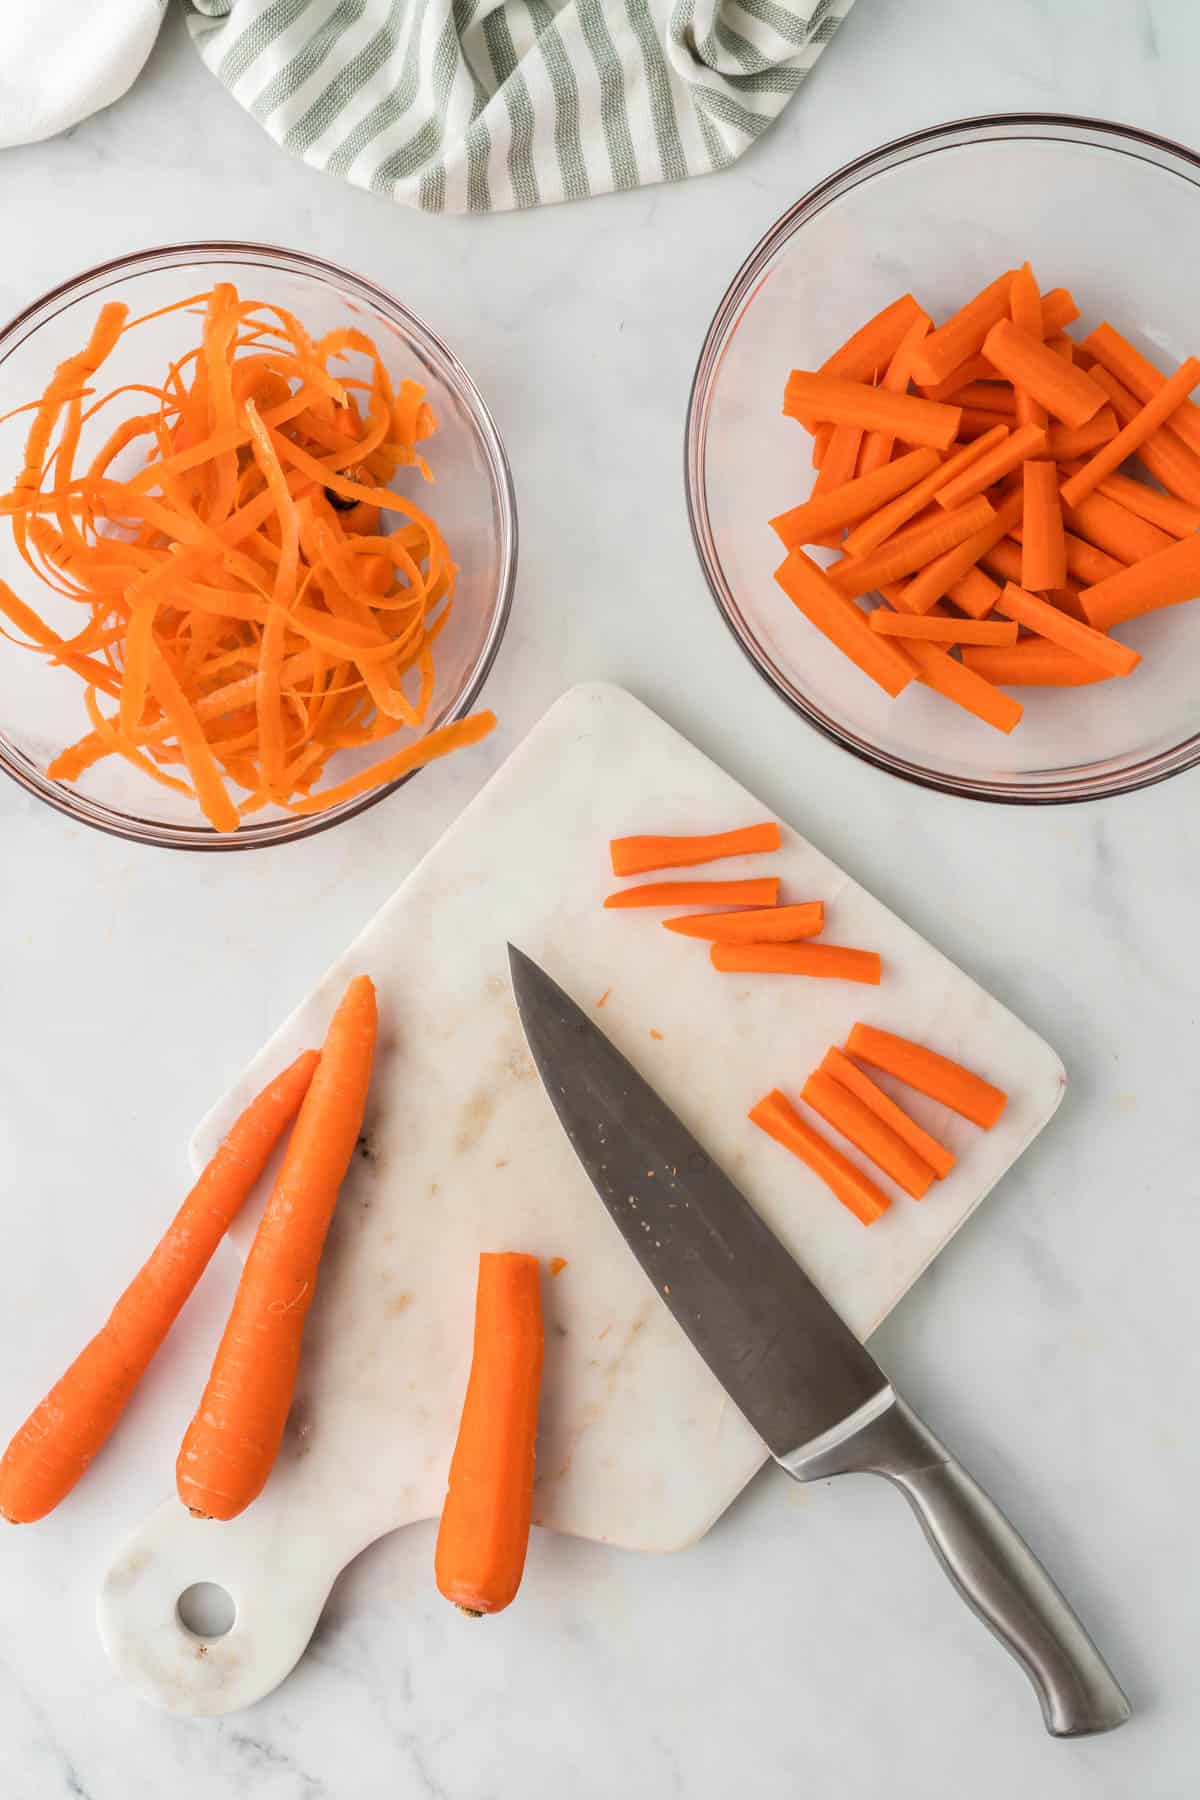 carrots being cut up on a cutting board